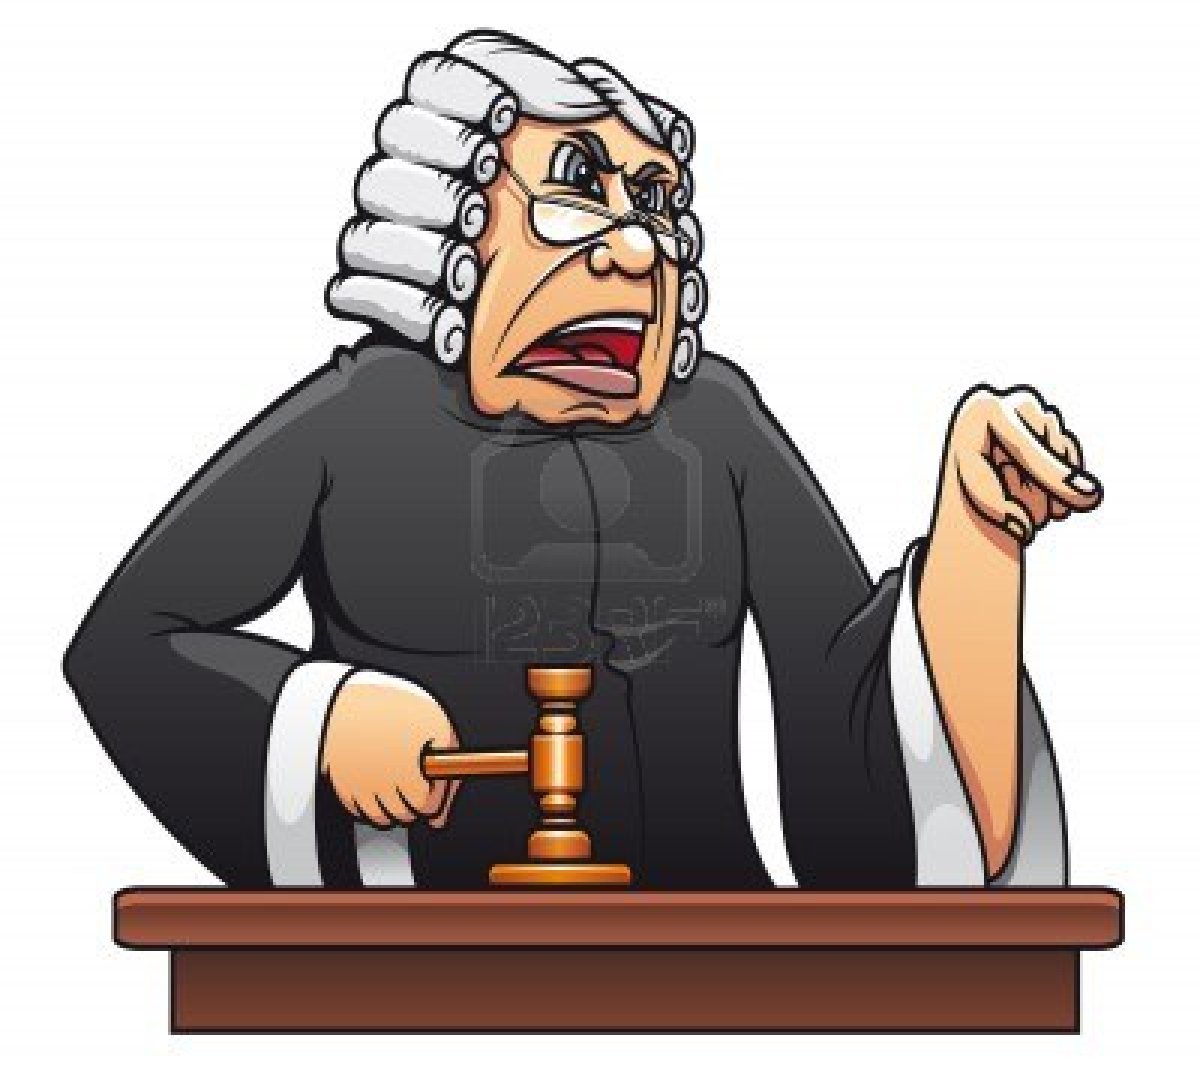 10859198 Judge With Gavel For Law Concept Design In Cartoon Style